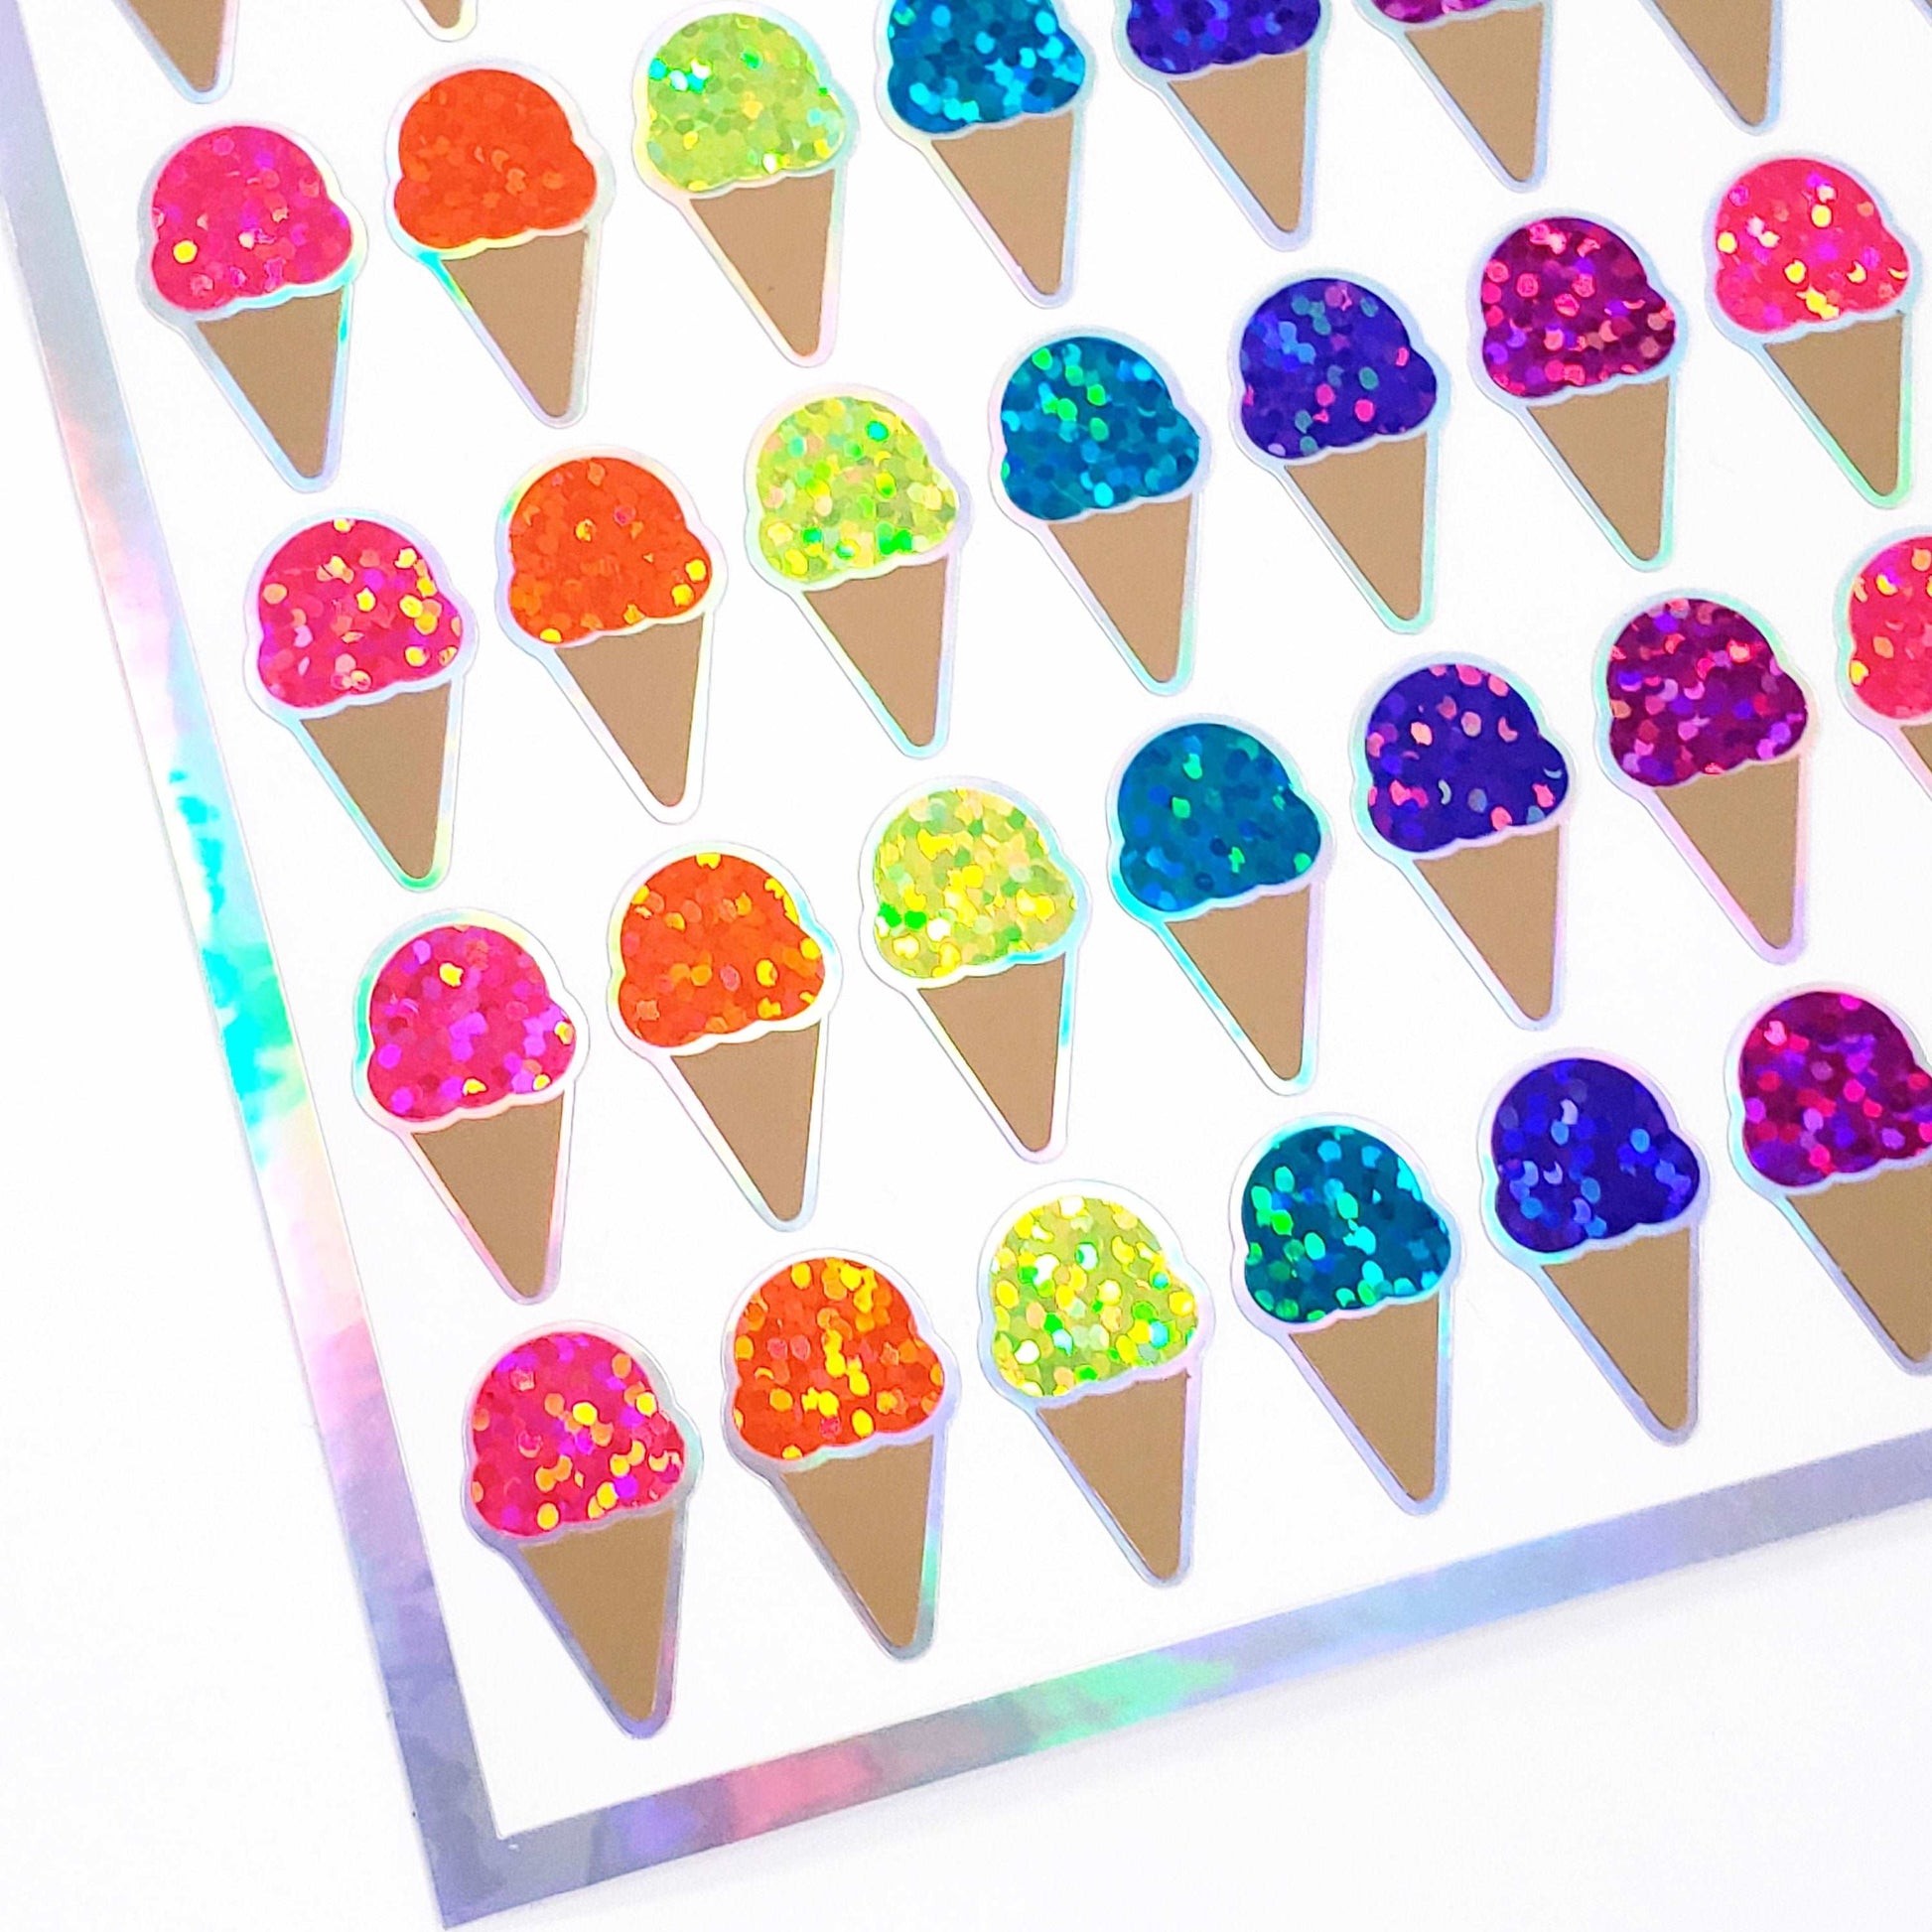 Ice Cream Cone Stickers, set of 60 Bright Rainbow Glitter Decals for Ice Cream Party Invitations, Card Envelopes, and Scrapbook Pages.